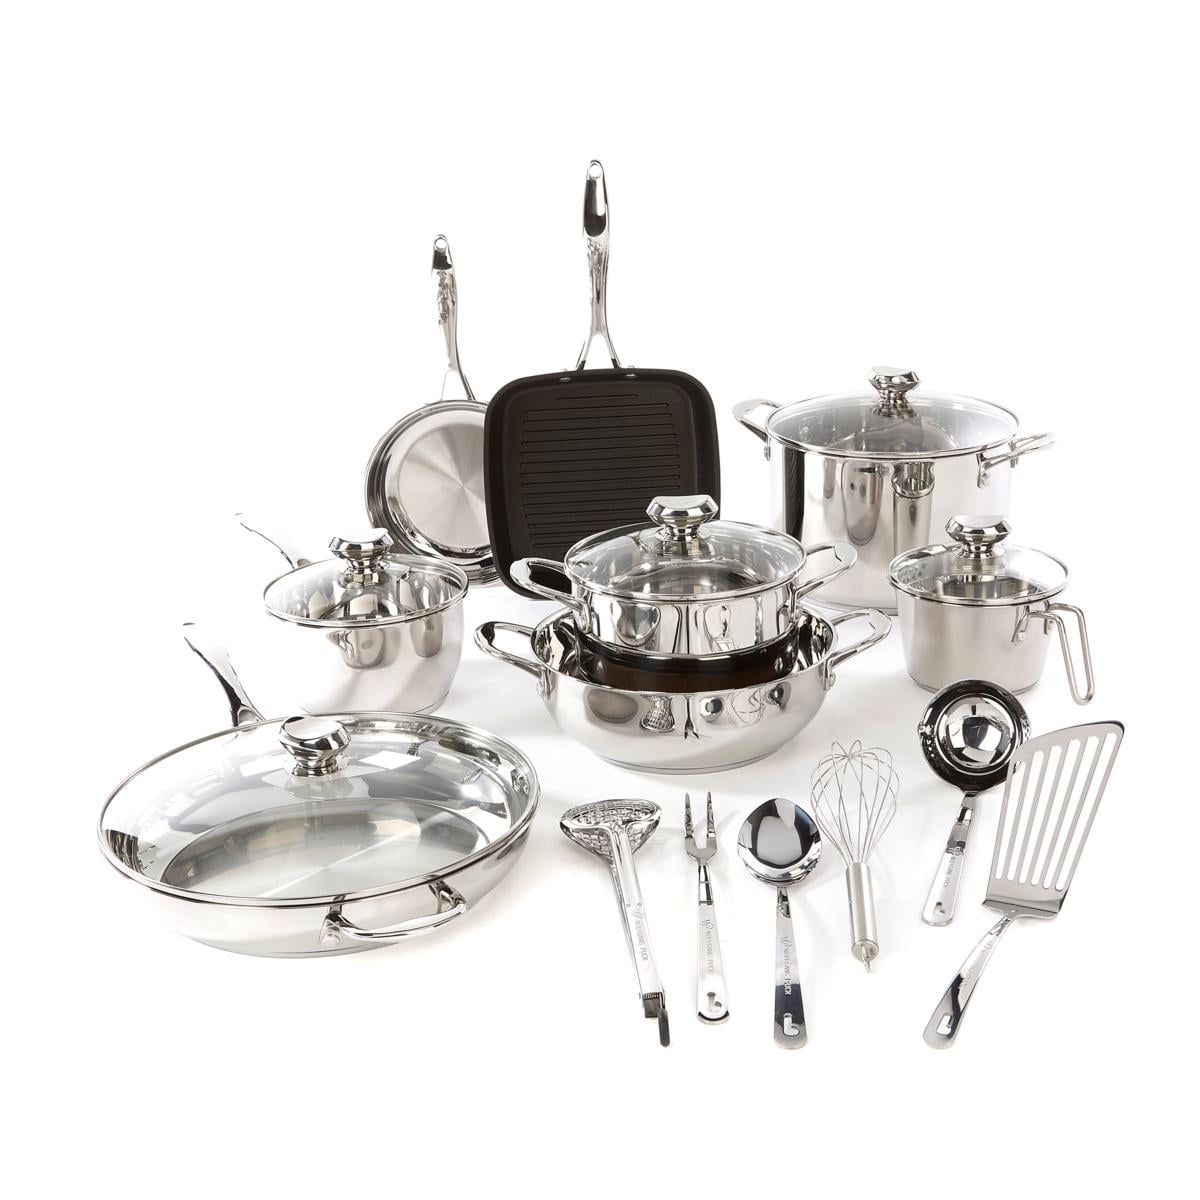 Wolfgang Puck Bistro Elite 19-piece Stainless Steel Cookware Set